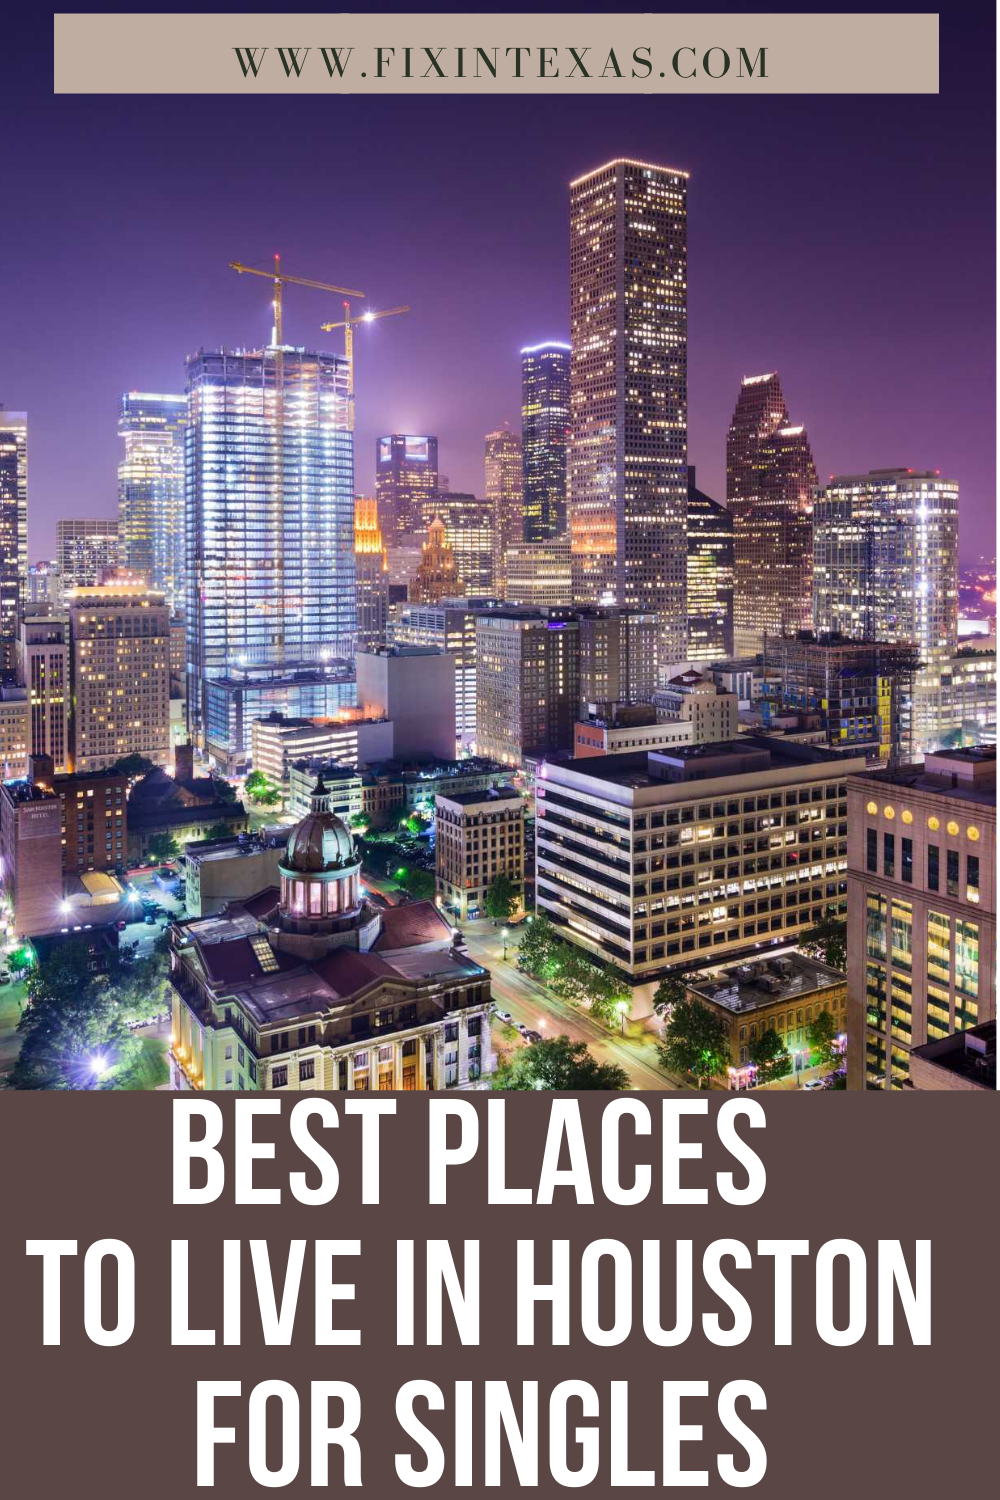 Best Places To Live In Houston For Singles - 2022 Guide - Fixin Texas